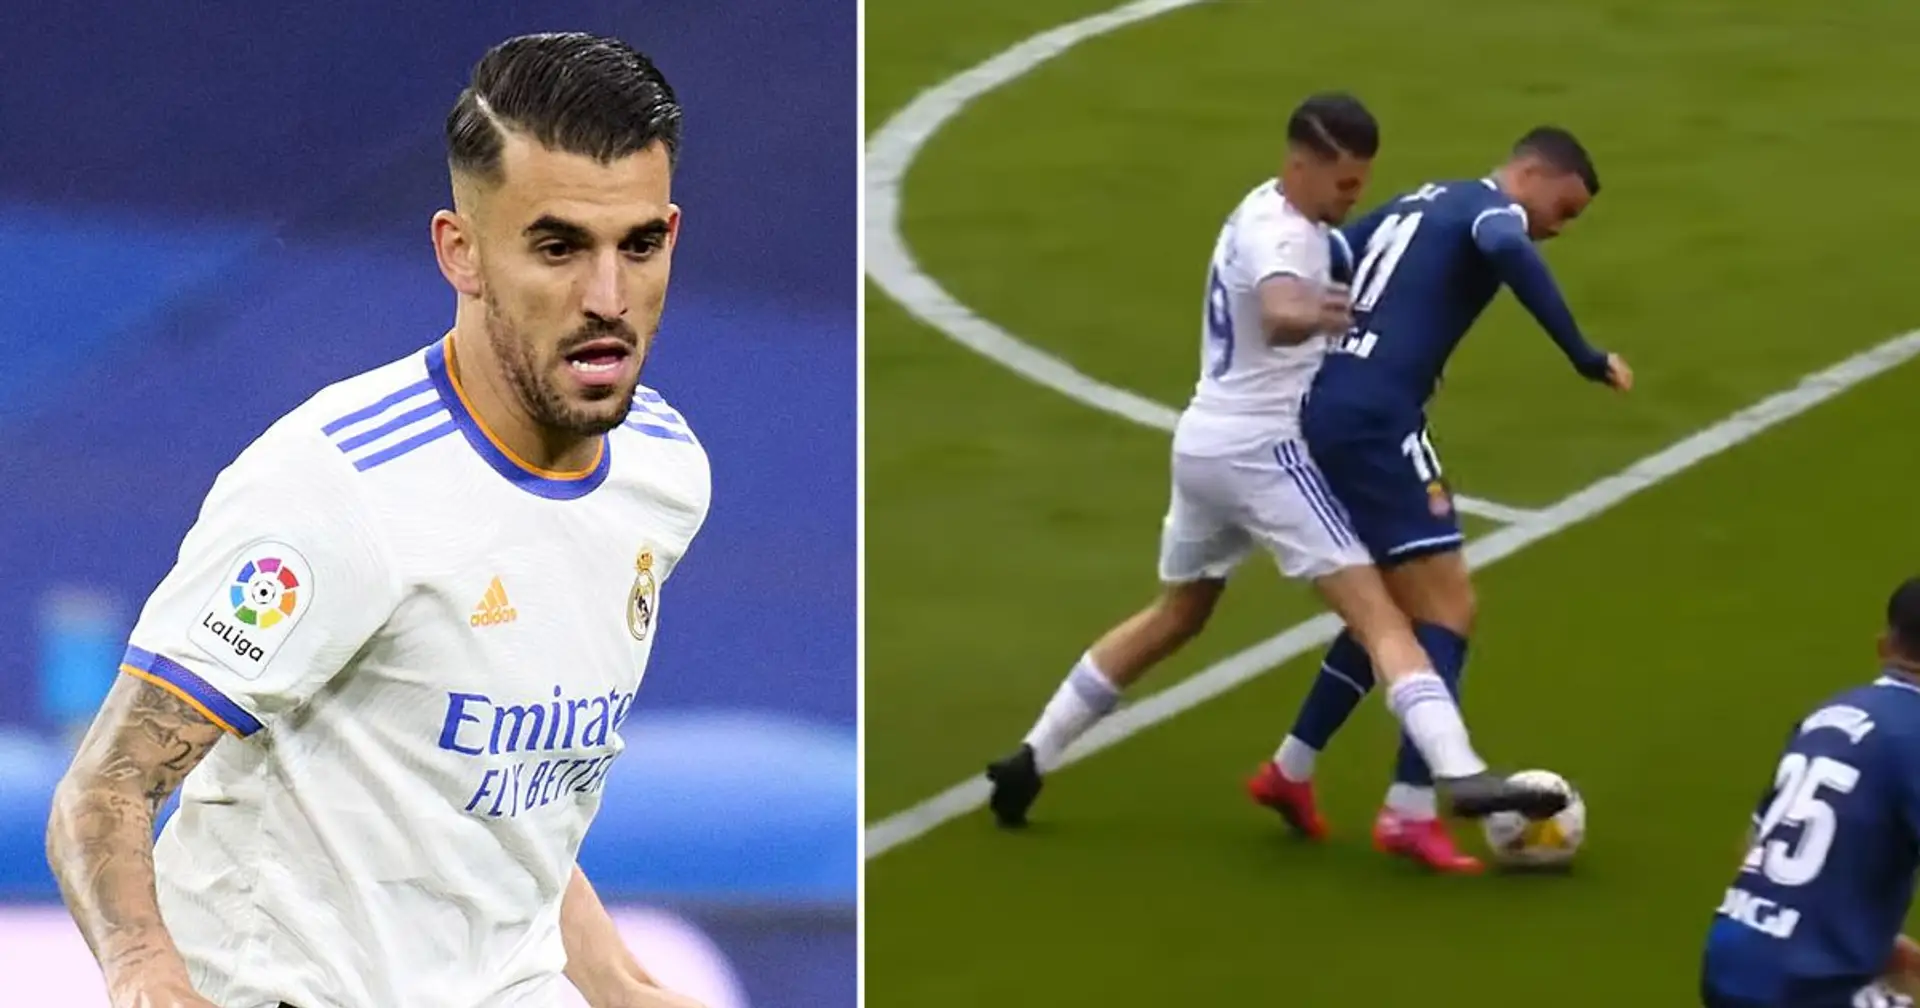 Nutmeg, perfect tackle & 3 more things that made Ceballos Man of the Match vs Espanyol